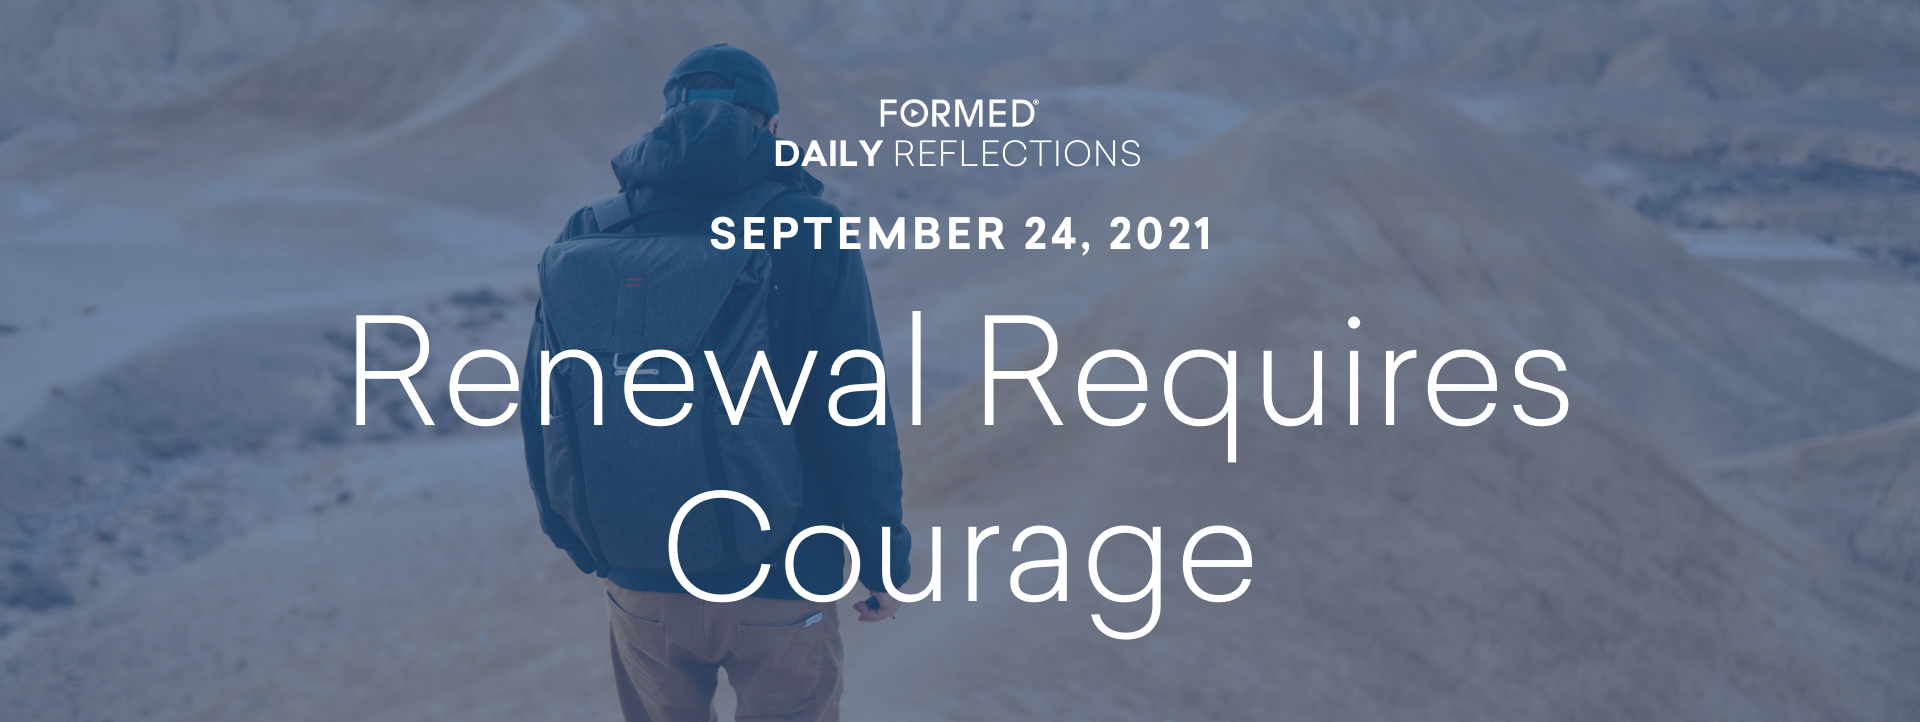 aa daily reflections september 24